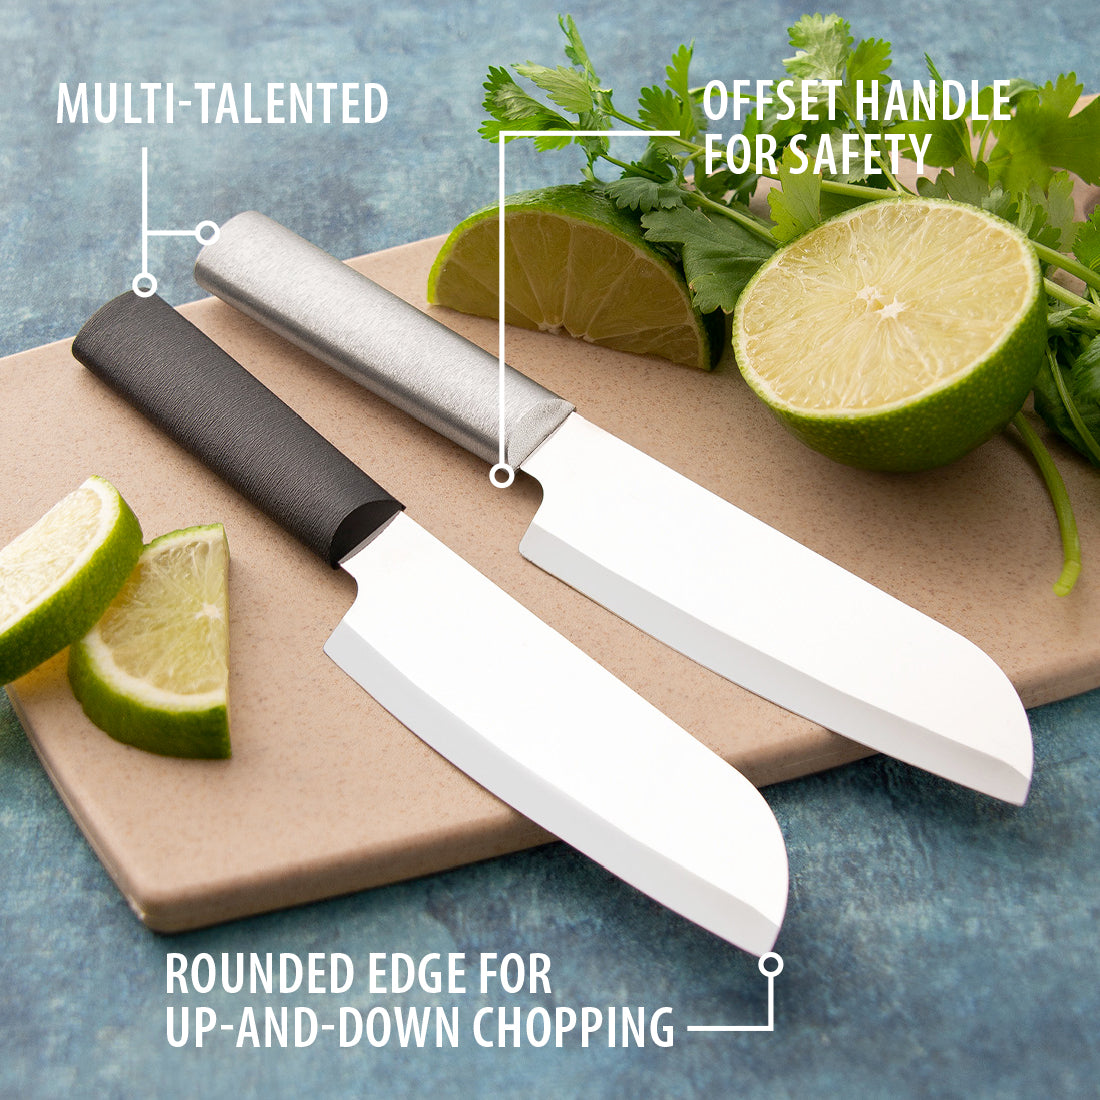 Kiwi Kitchen Knives, Set of 8, Chef's Knife, Stainless Steel Blade, Wooden  Handle, Cooking Knives Kiwi Set 5 Pcs 